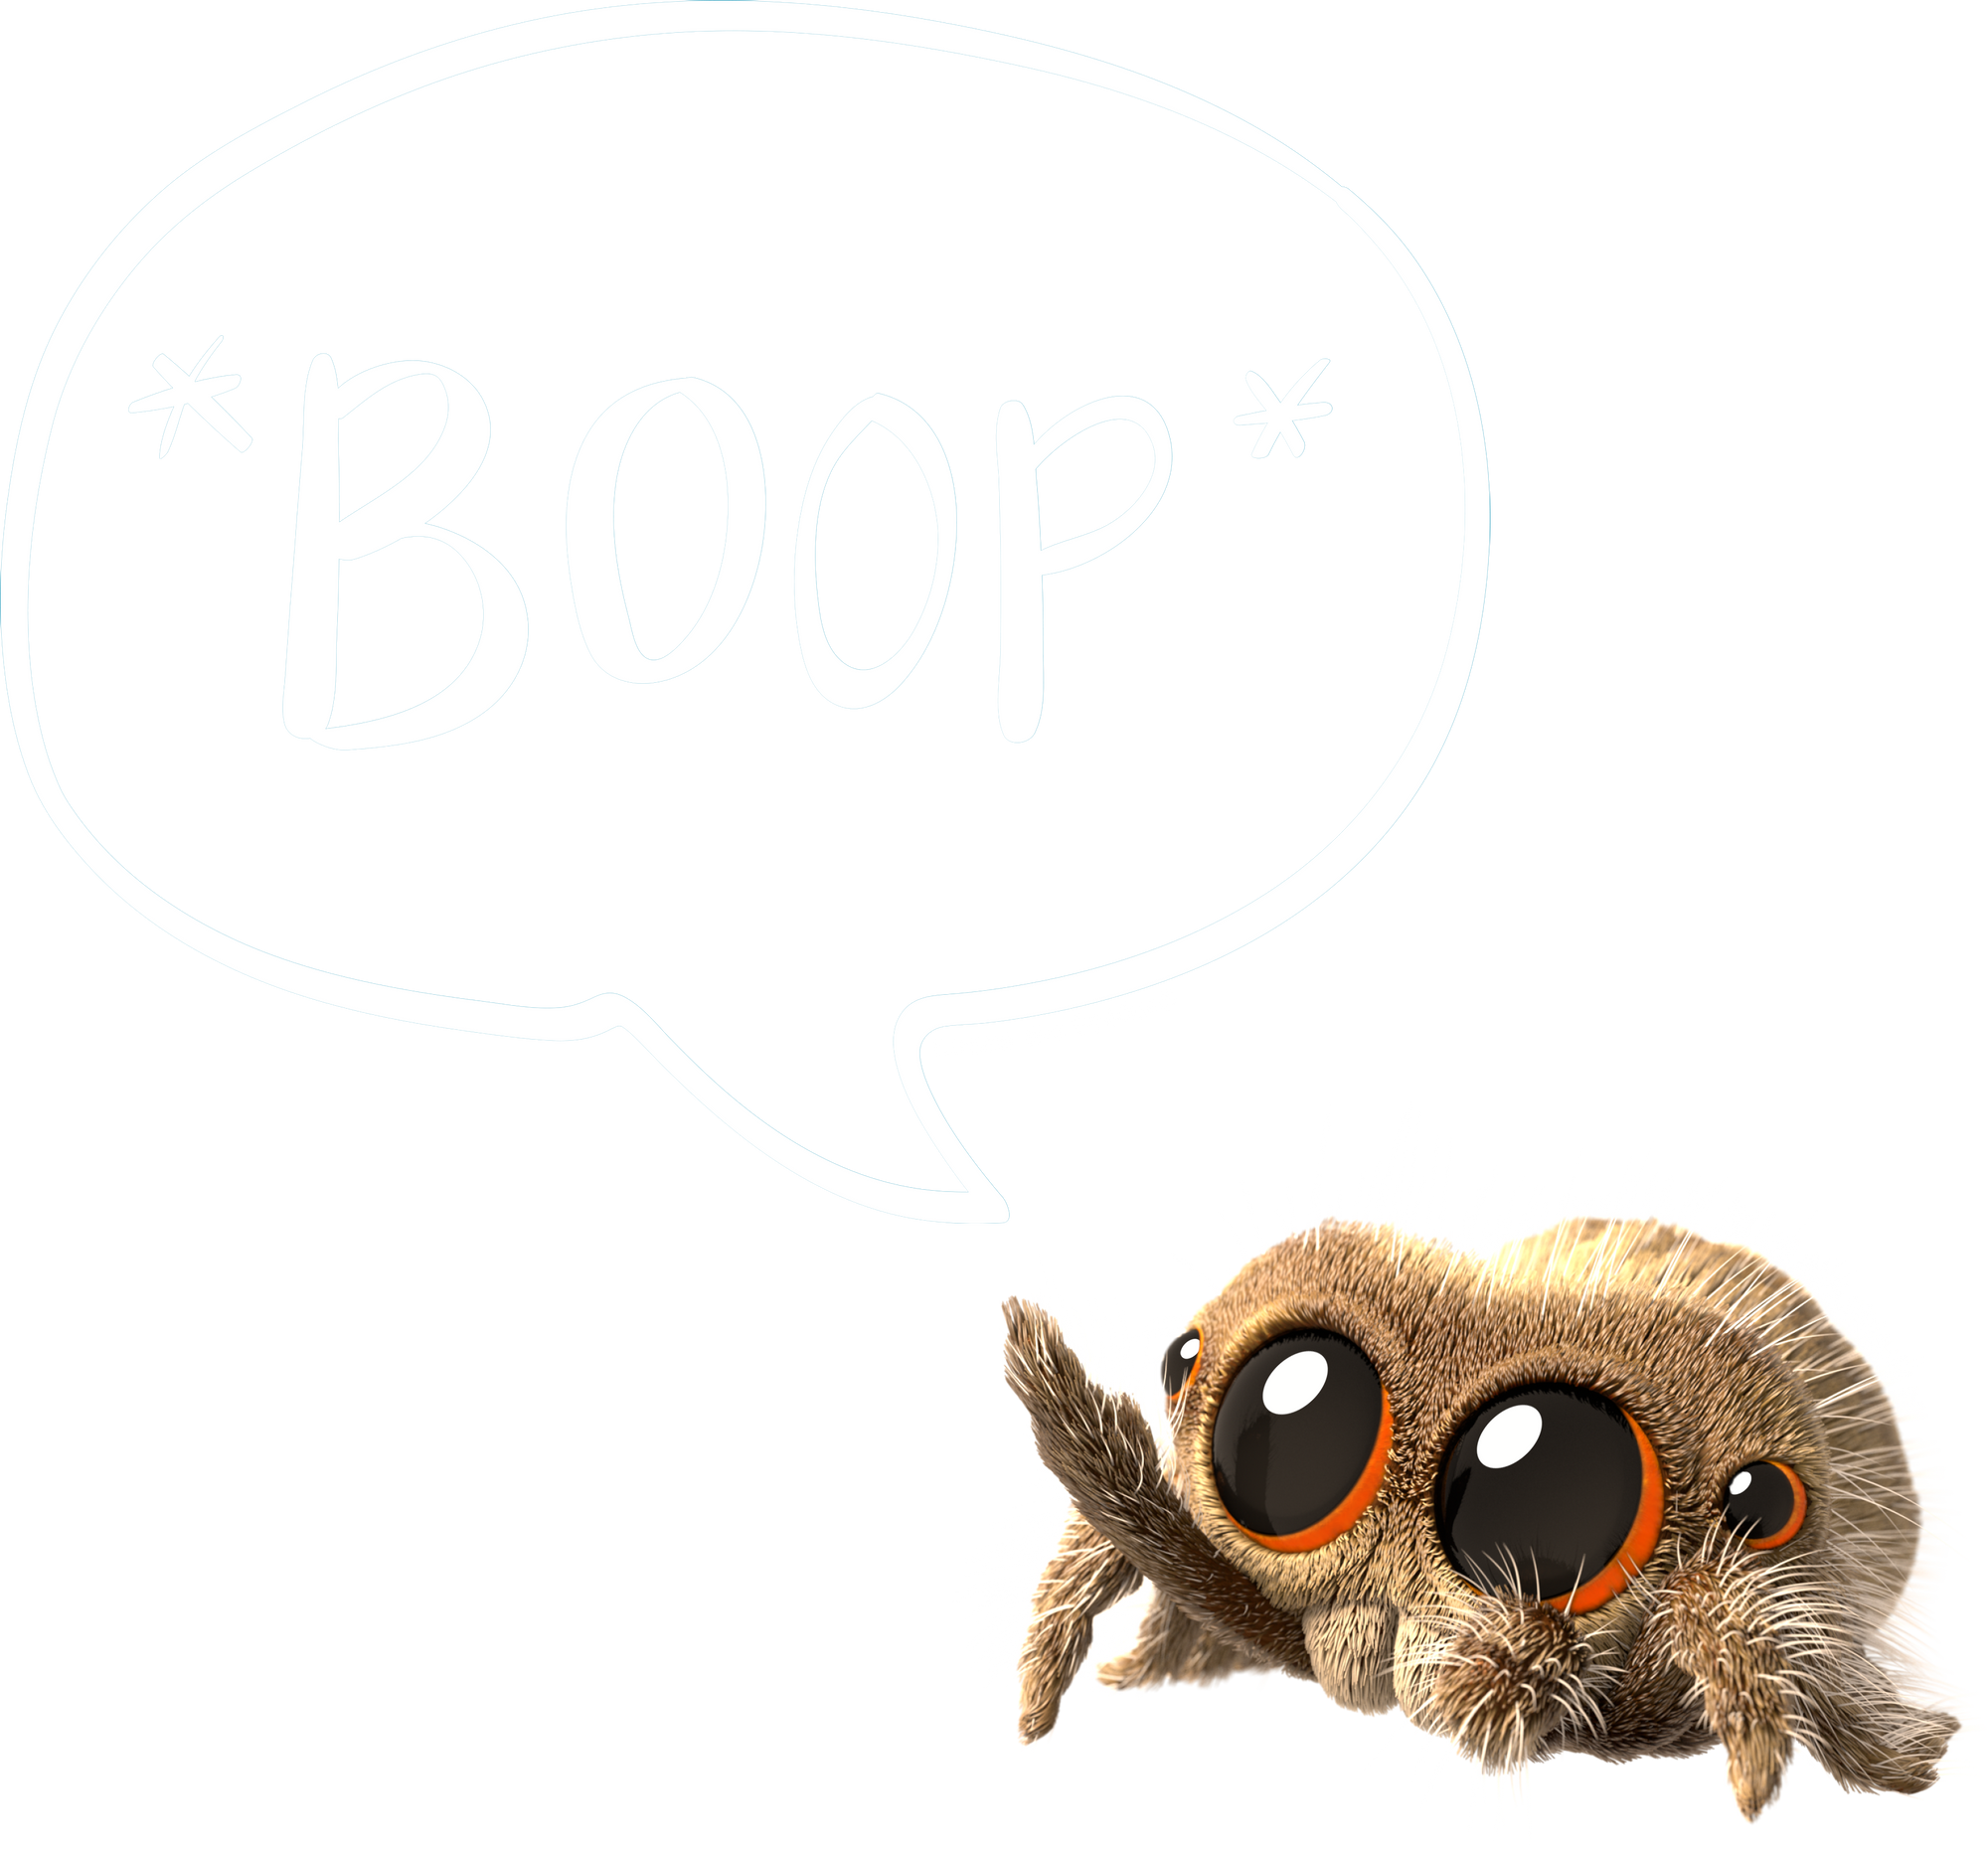 Lucas the Spider *Boop*, Lucas the Spider Store, Genuine Lucas the Spider Products, The Boop Troop